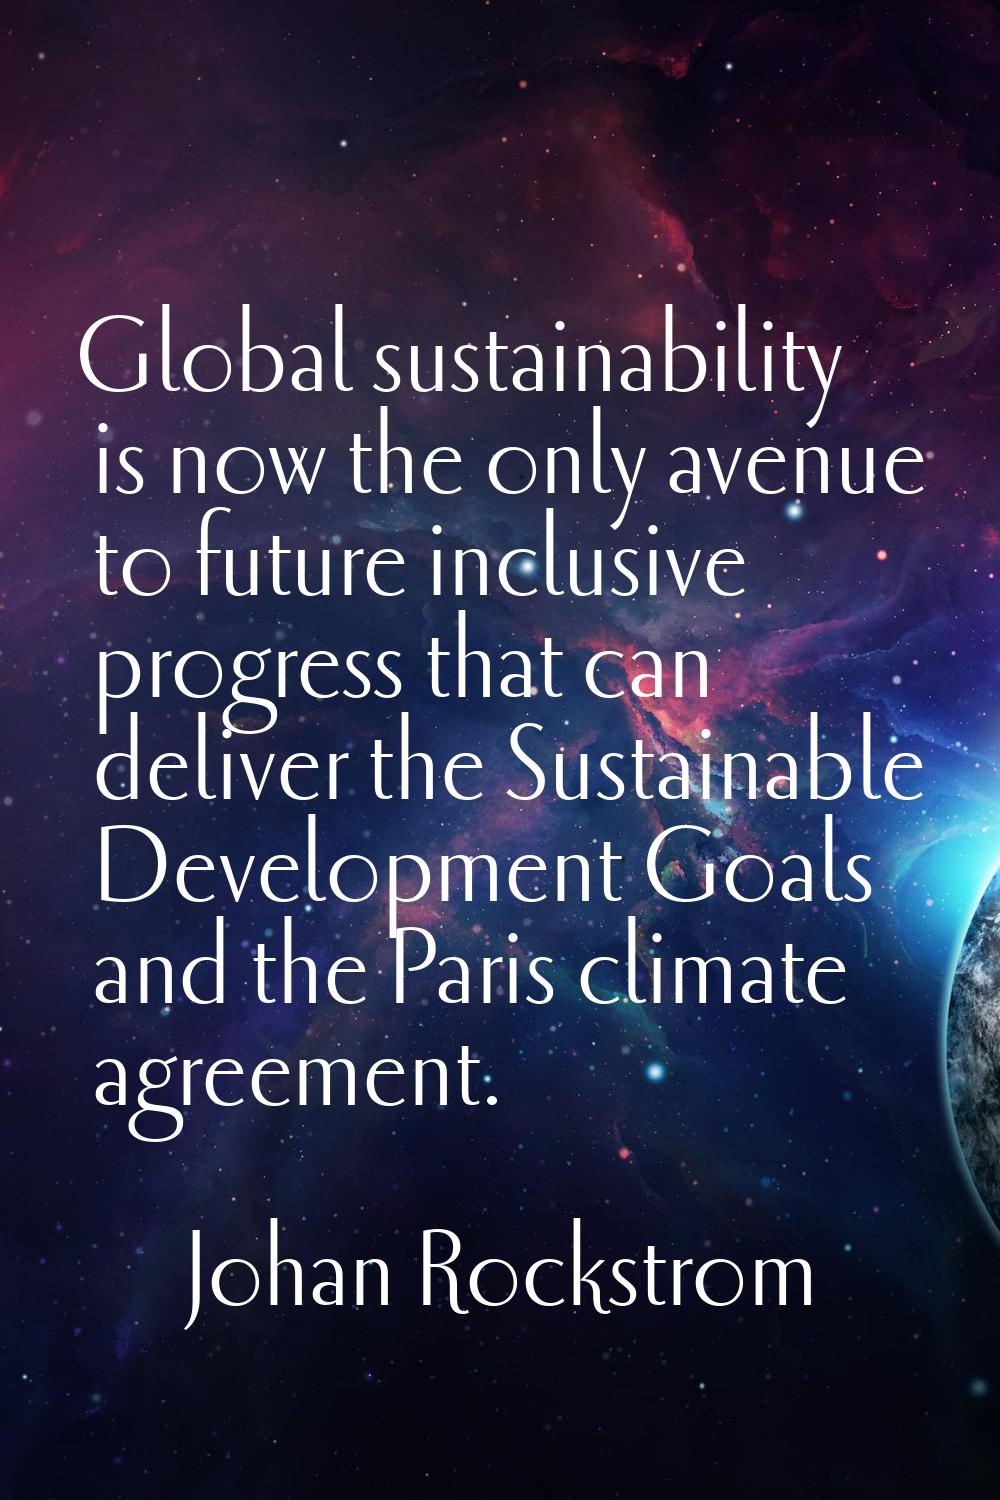 Global sustainability is now the only avenue to future inclusive progress that can deliver the Sust